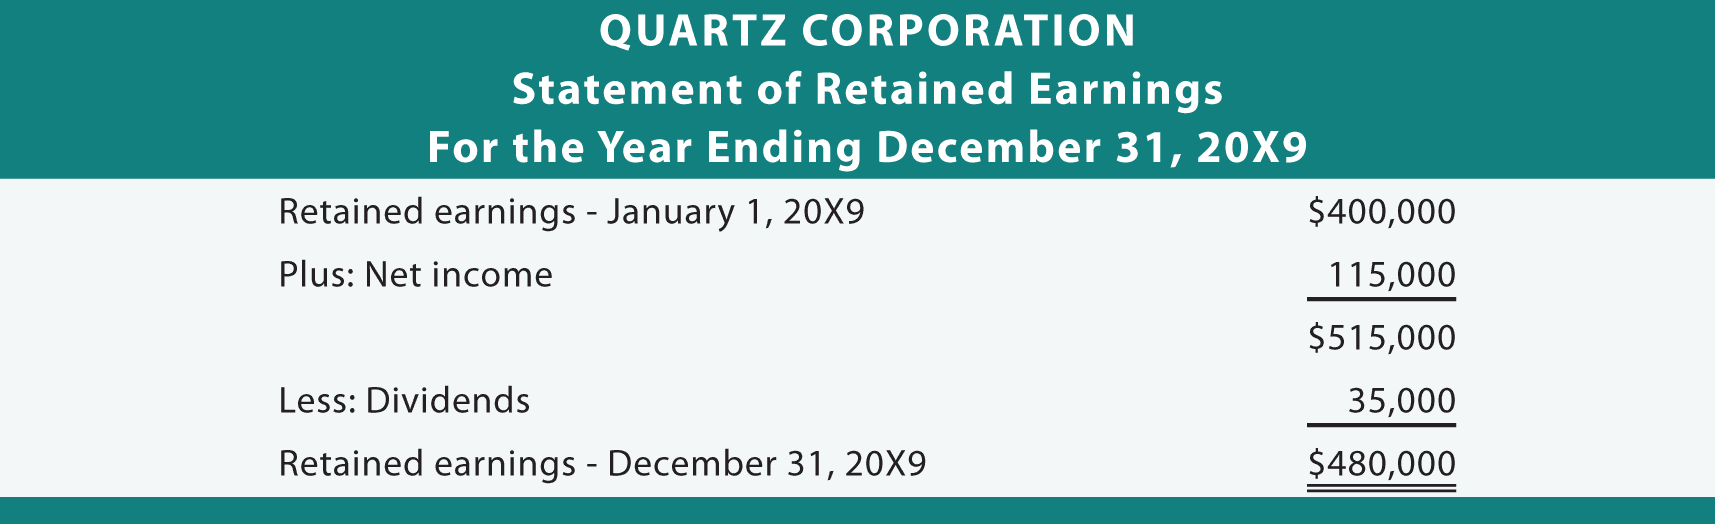 Quartz Statement of Retained Earnings Example